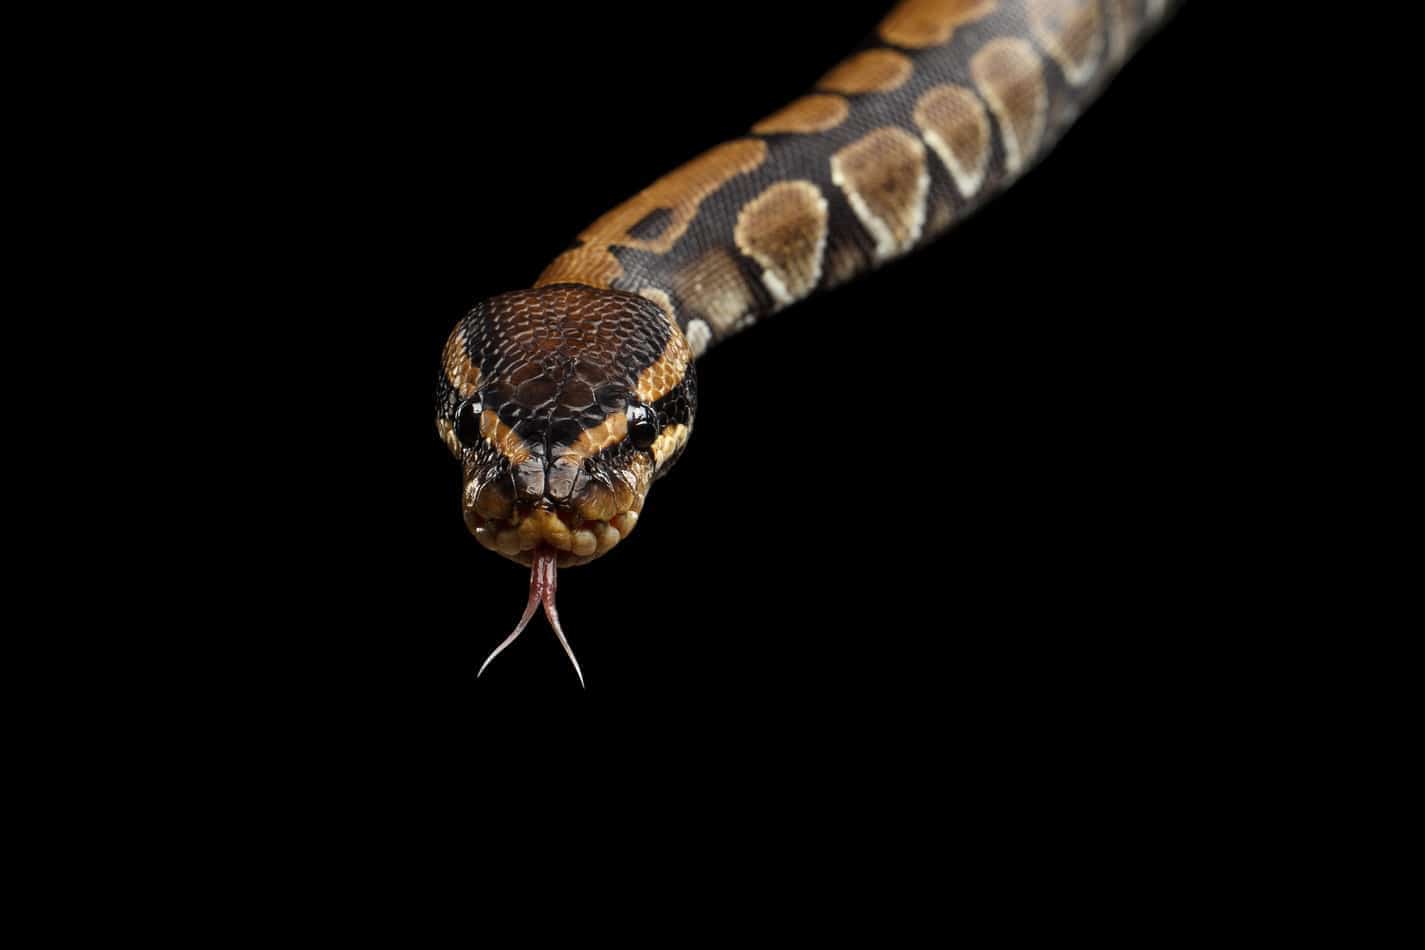 Can Ball Pythons See in the Dark?